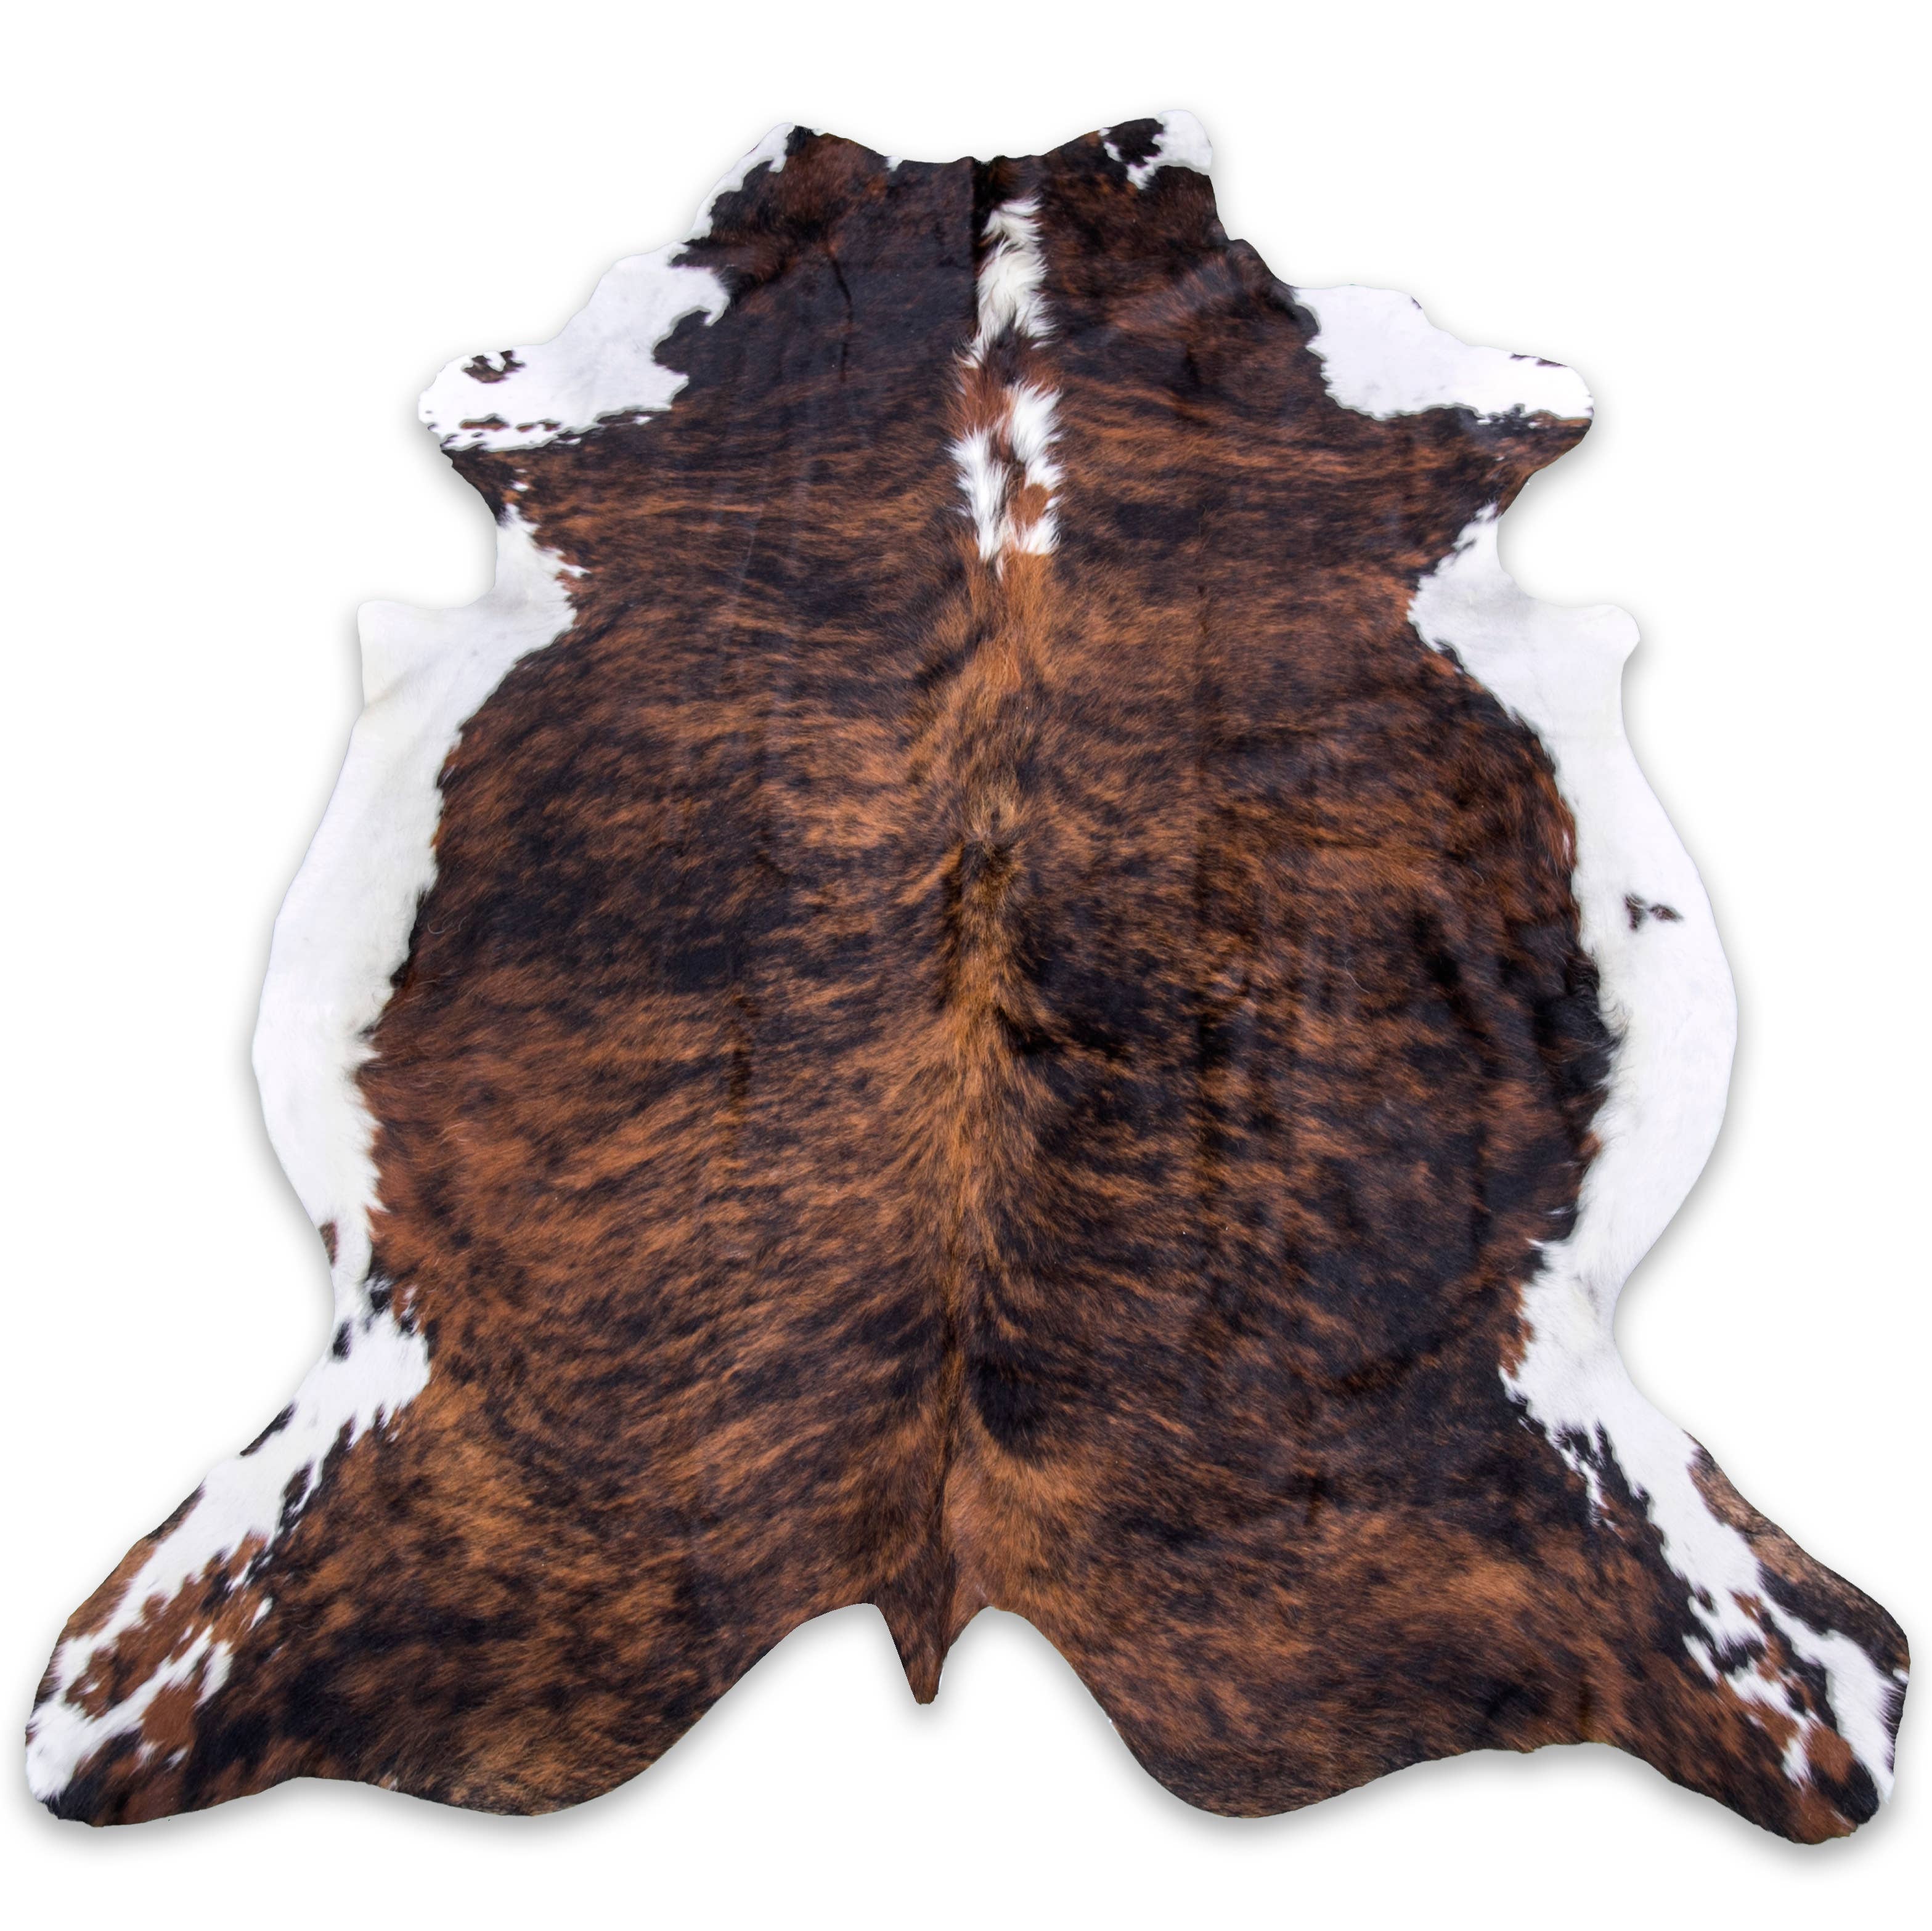 Brindle Rodeo Cowhide Rug Hair on authentic leather rug size approx 6x7 ft 